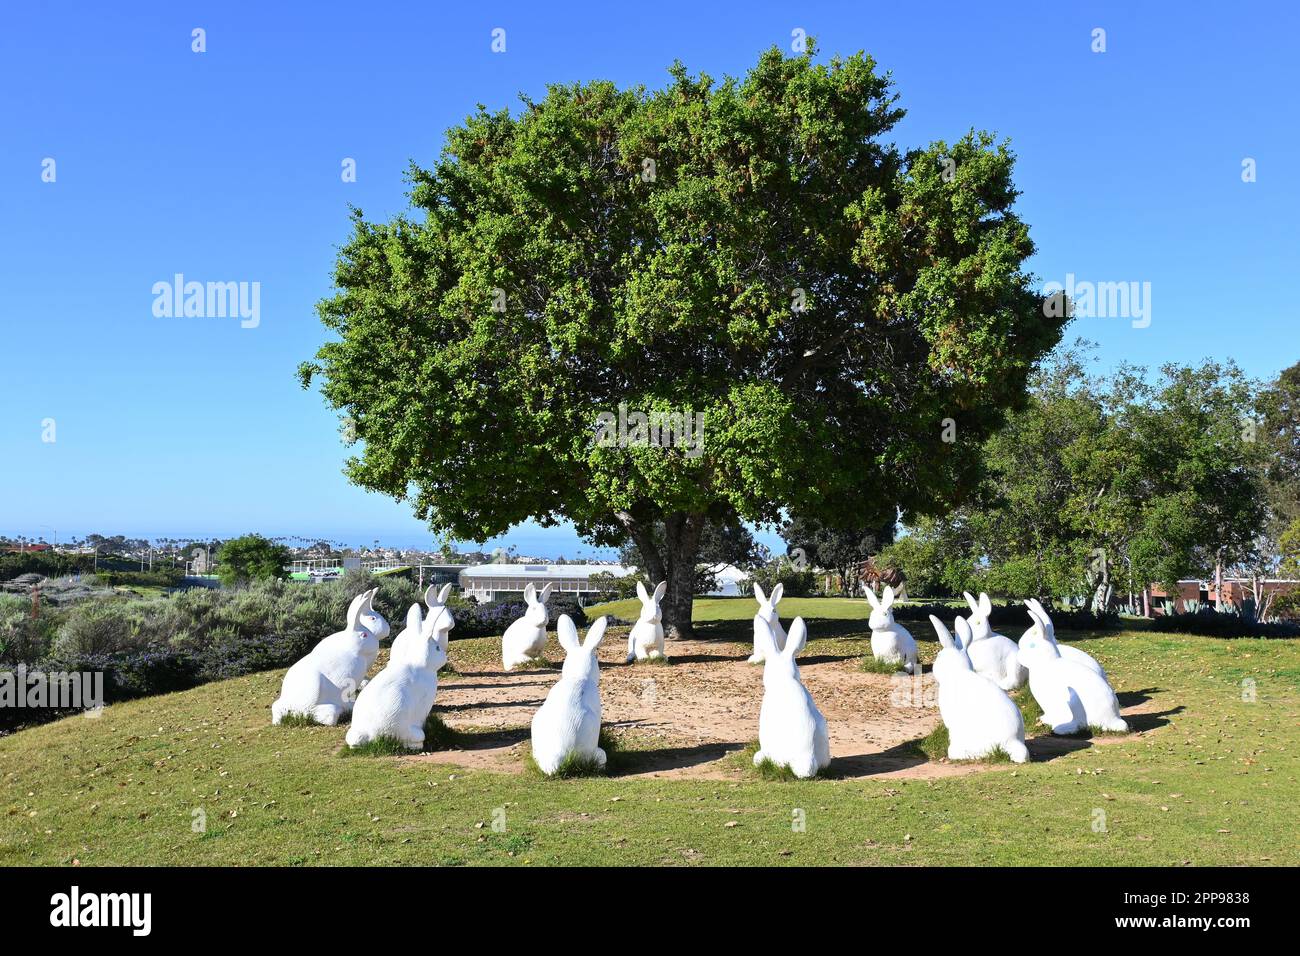 NEWPORT BEACH, CALIFORNIA - 22 APR 2023: Bunnyhenge in Civic Center Park, a public art display of 14 large white bunnies, arranged in a circle. Stock Photo